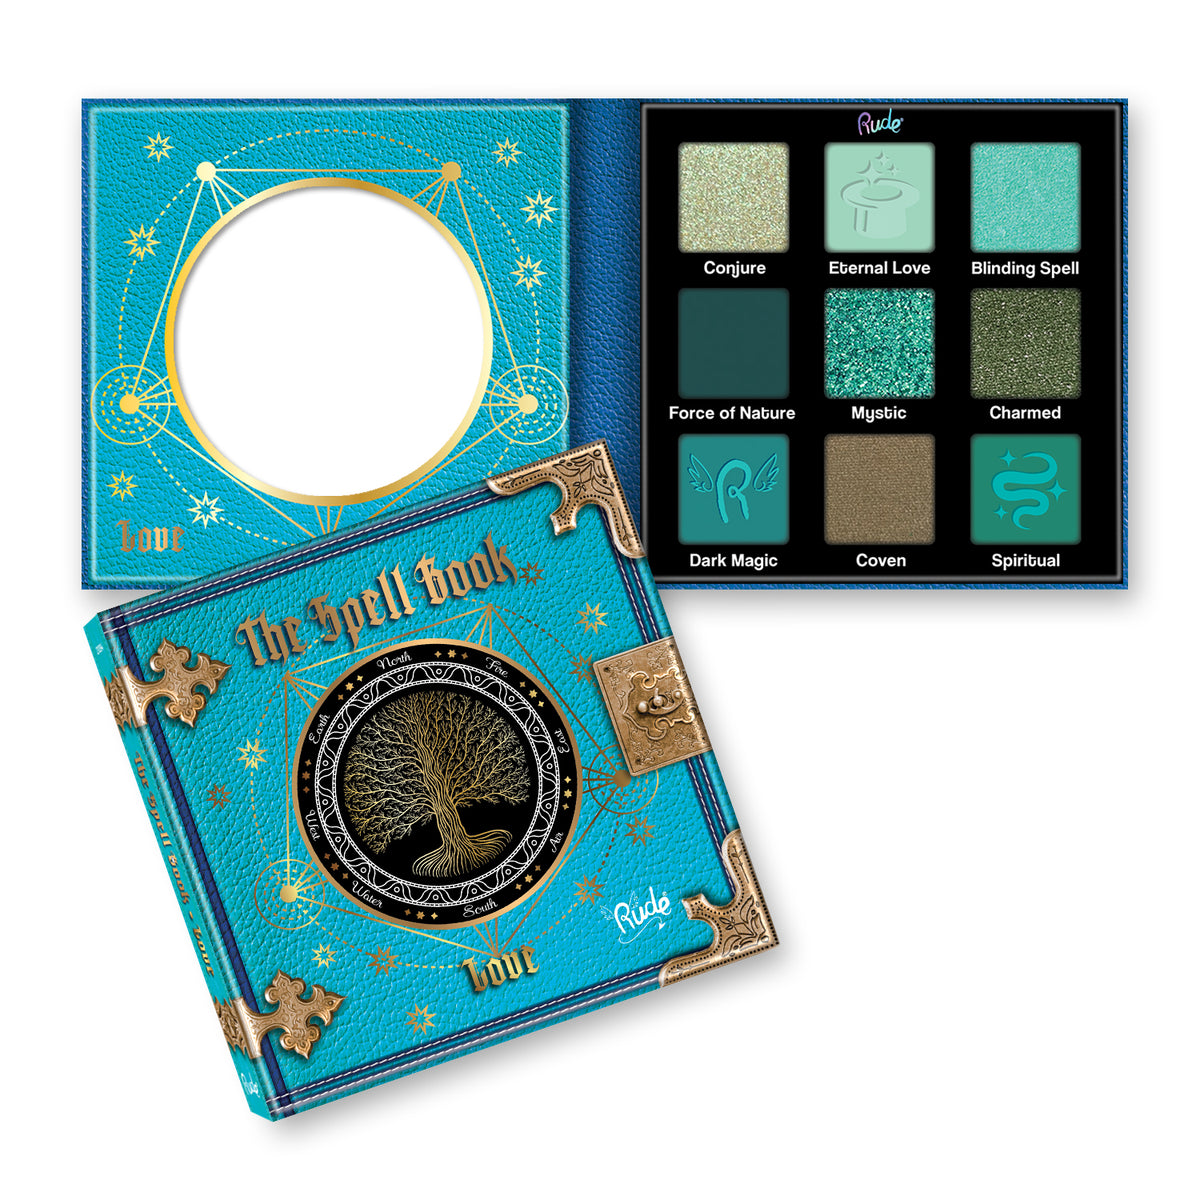 The Spell Book Smooth and Blendable Eyeshadow Palette